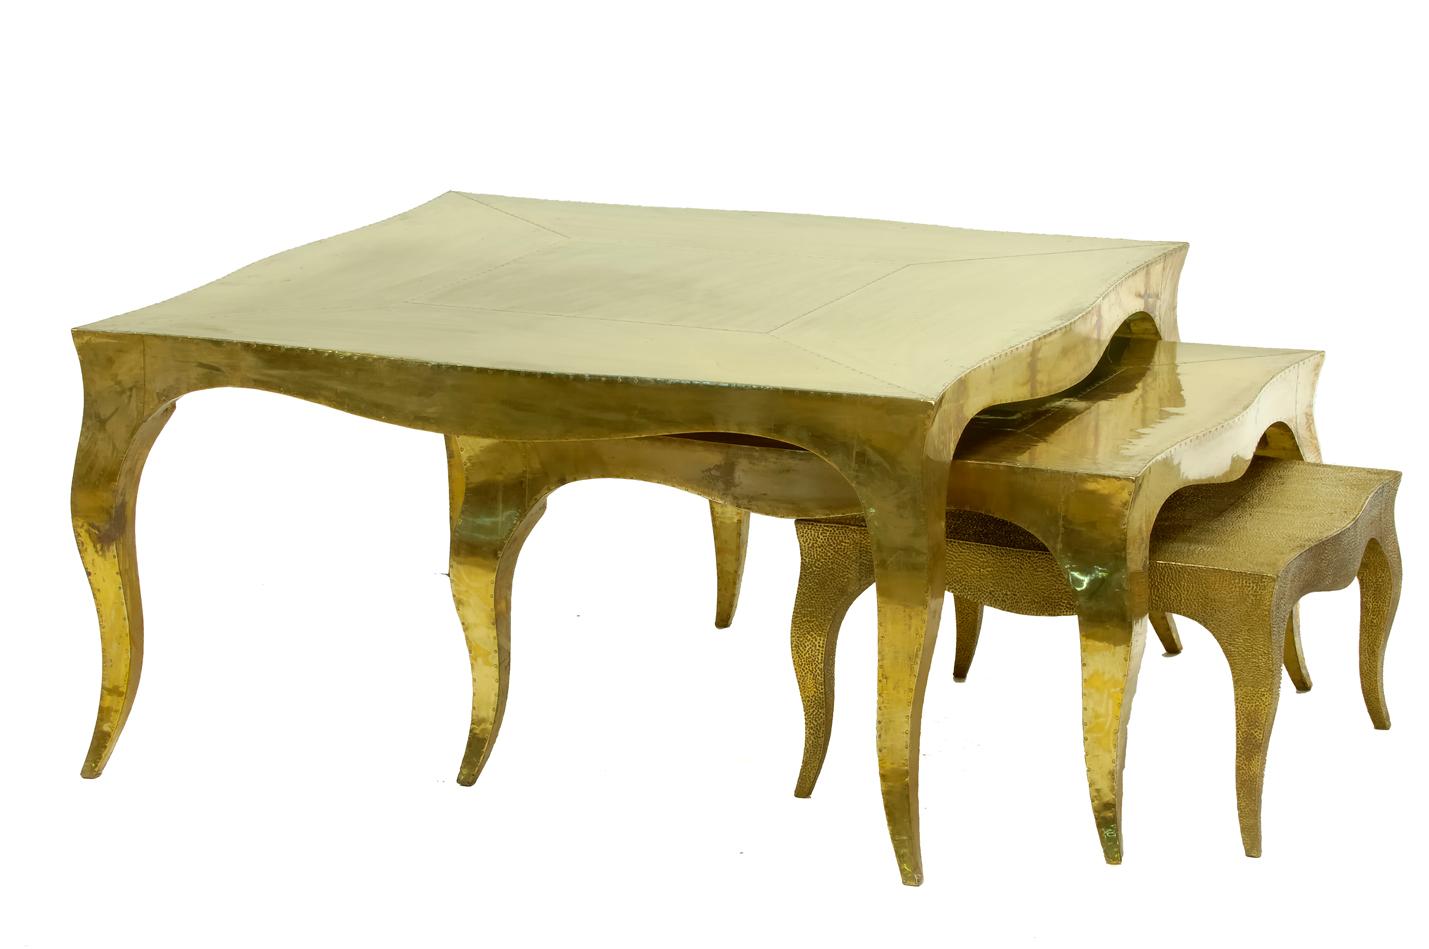 Louise Art Deco Industrial and Work Tables Mid. Hammered White Bronze by Paul Ma For Sale 10